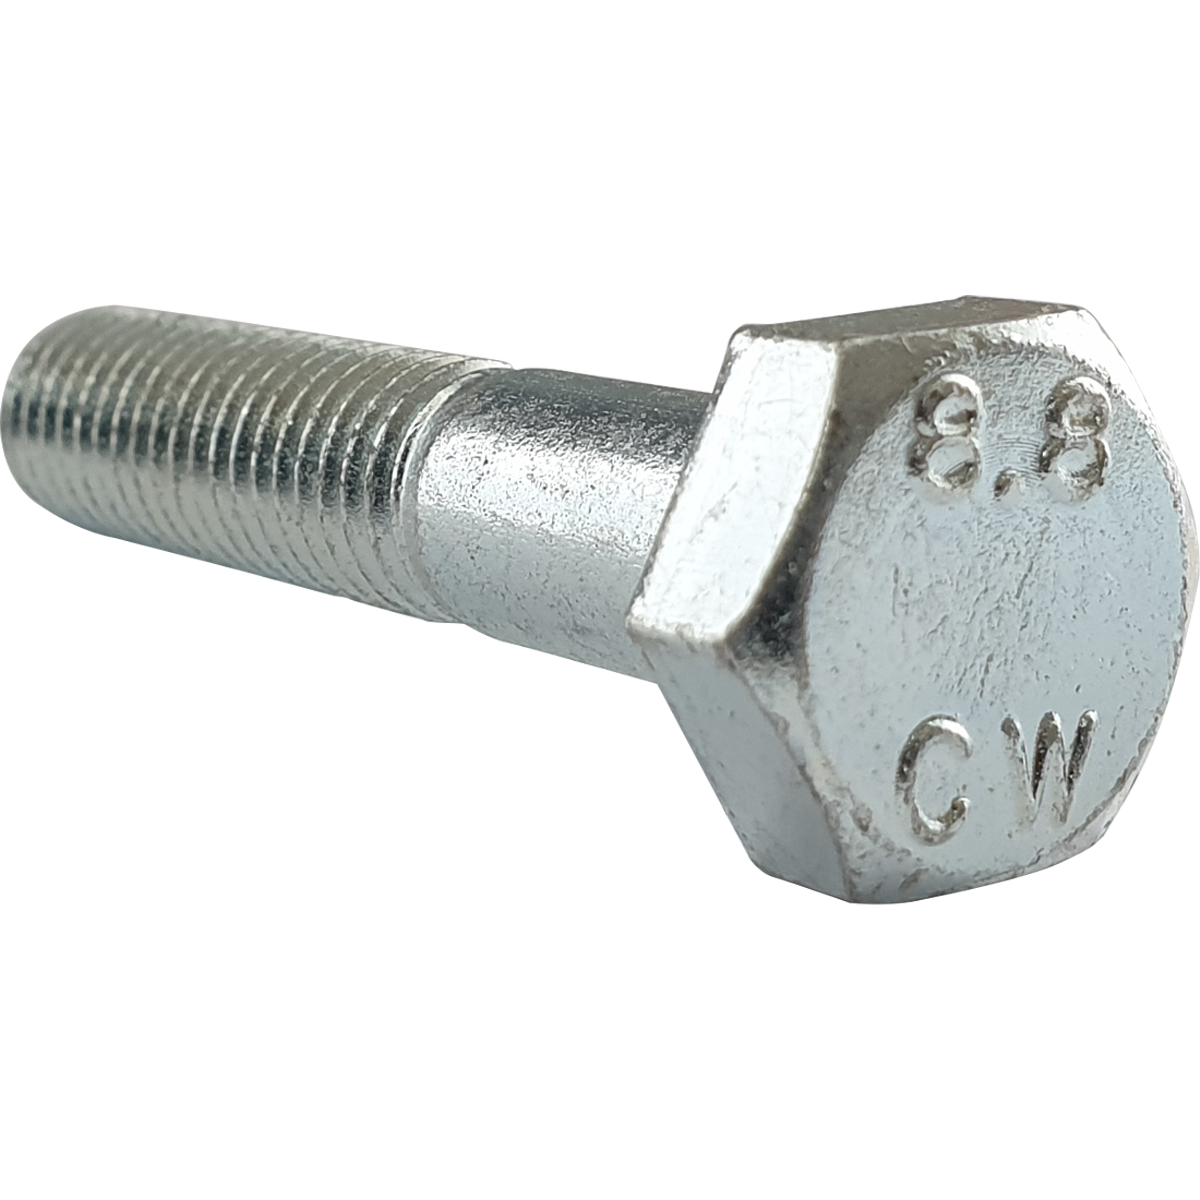 UNF BZP part thread hex bolts, also known as hexagon bolts, or hex head bolts, in a variety of sizes and at competitive prices